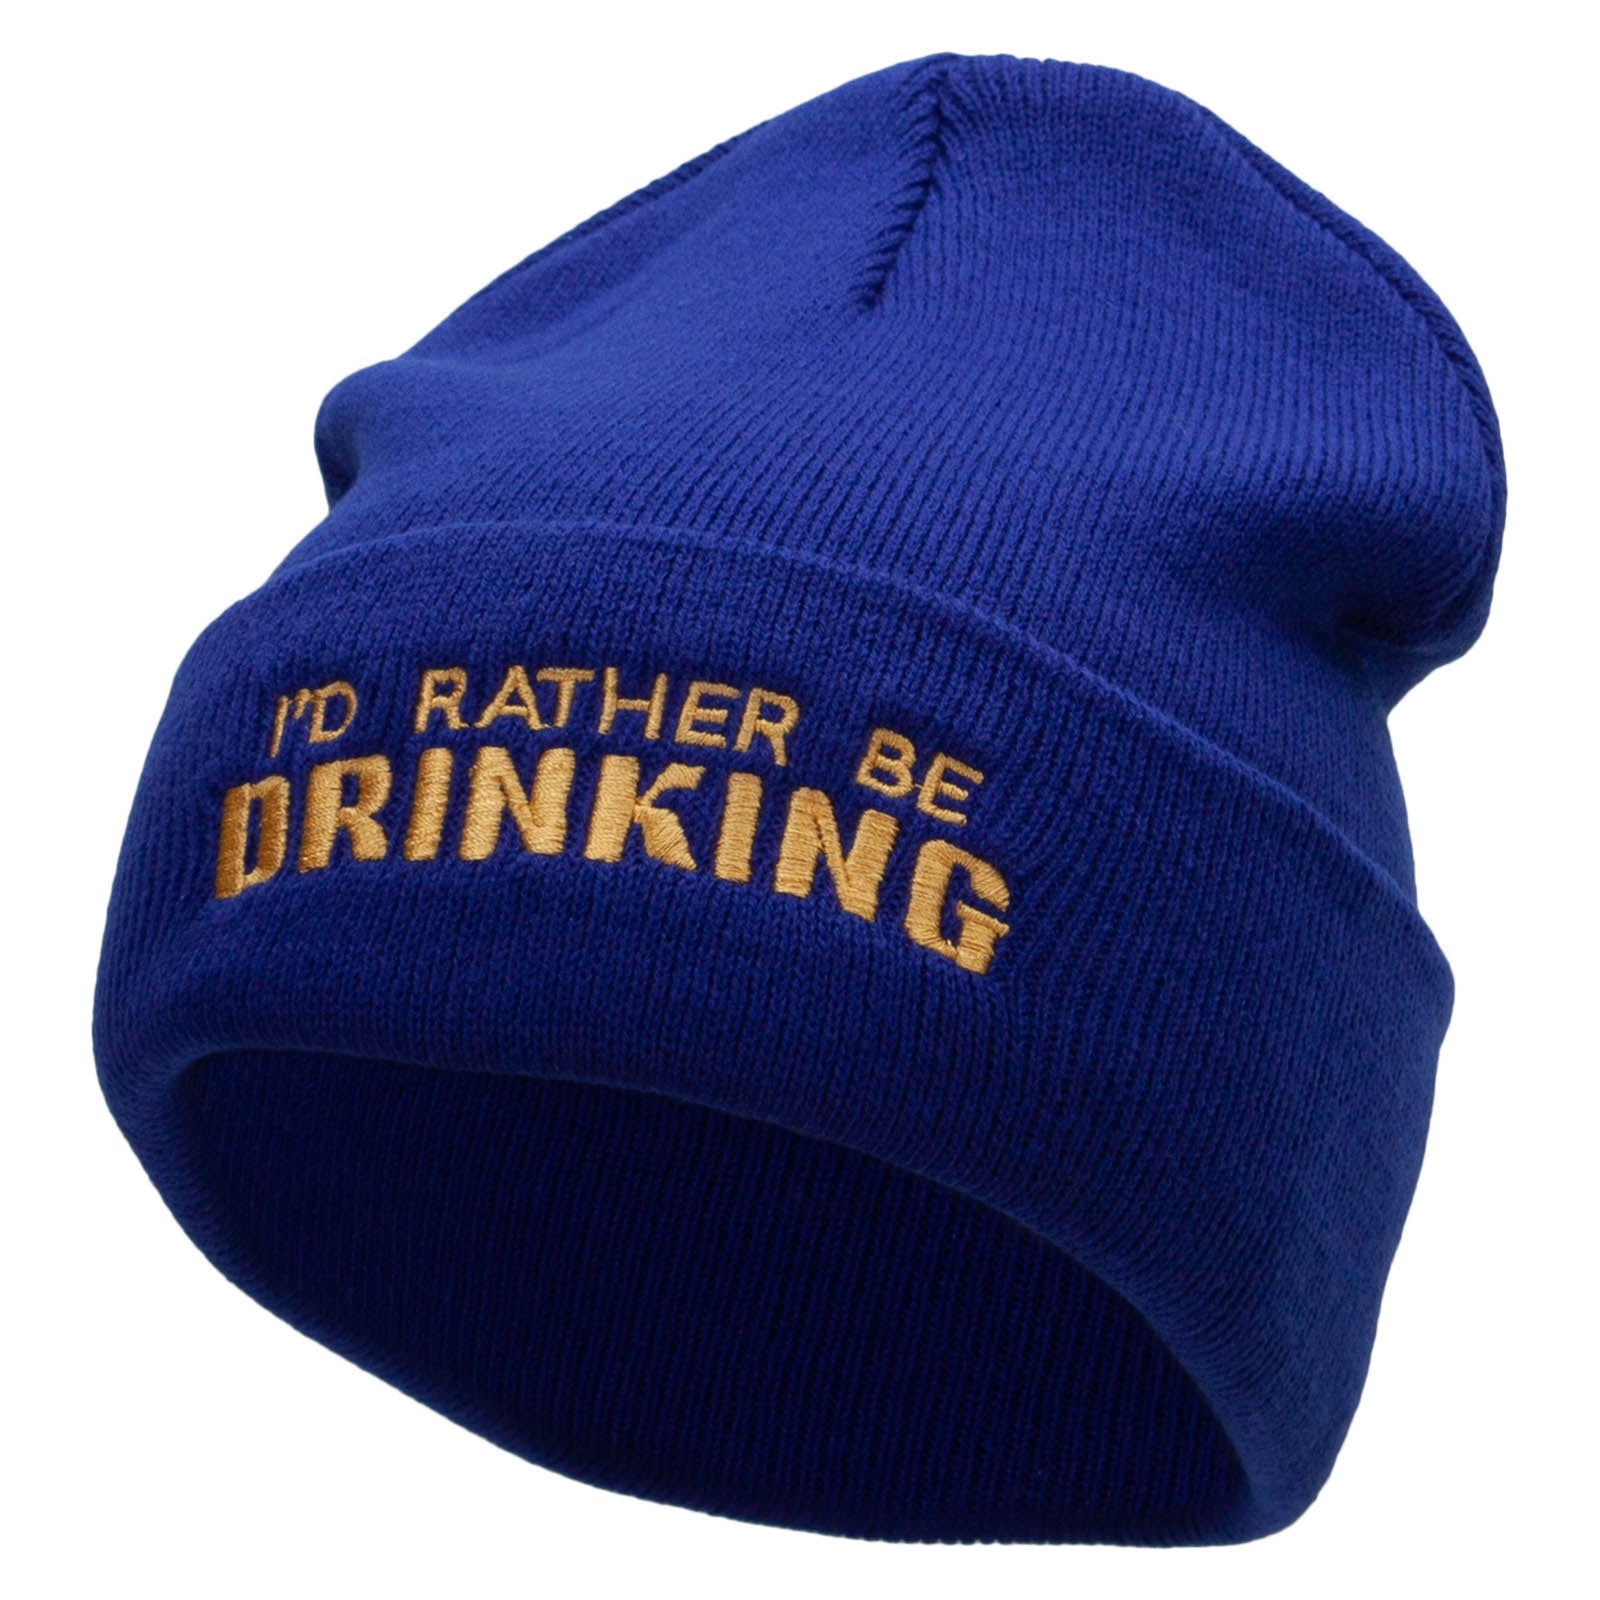 I &#039;d Rather Be Drinking Phrase Embroidered 12 Inch Long Knitted Beanie - Royal OSFM